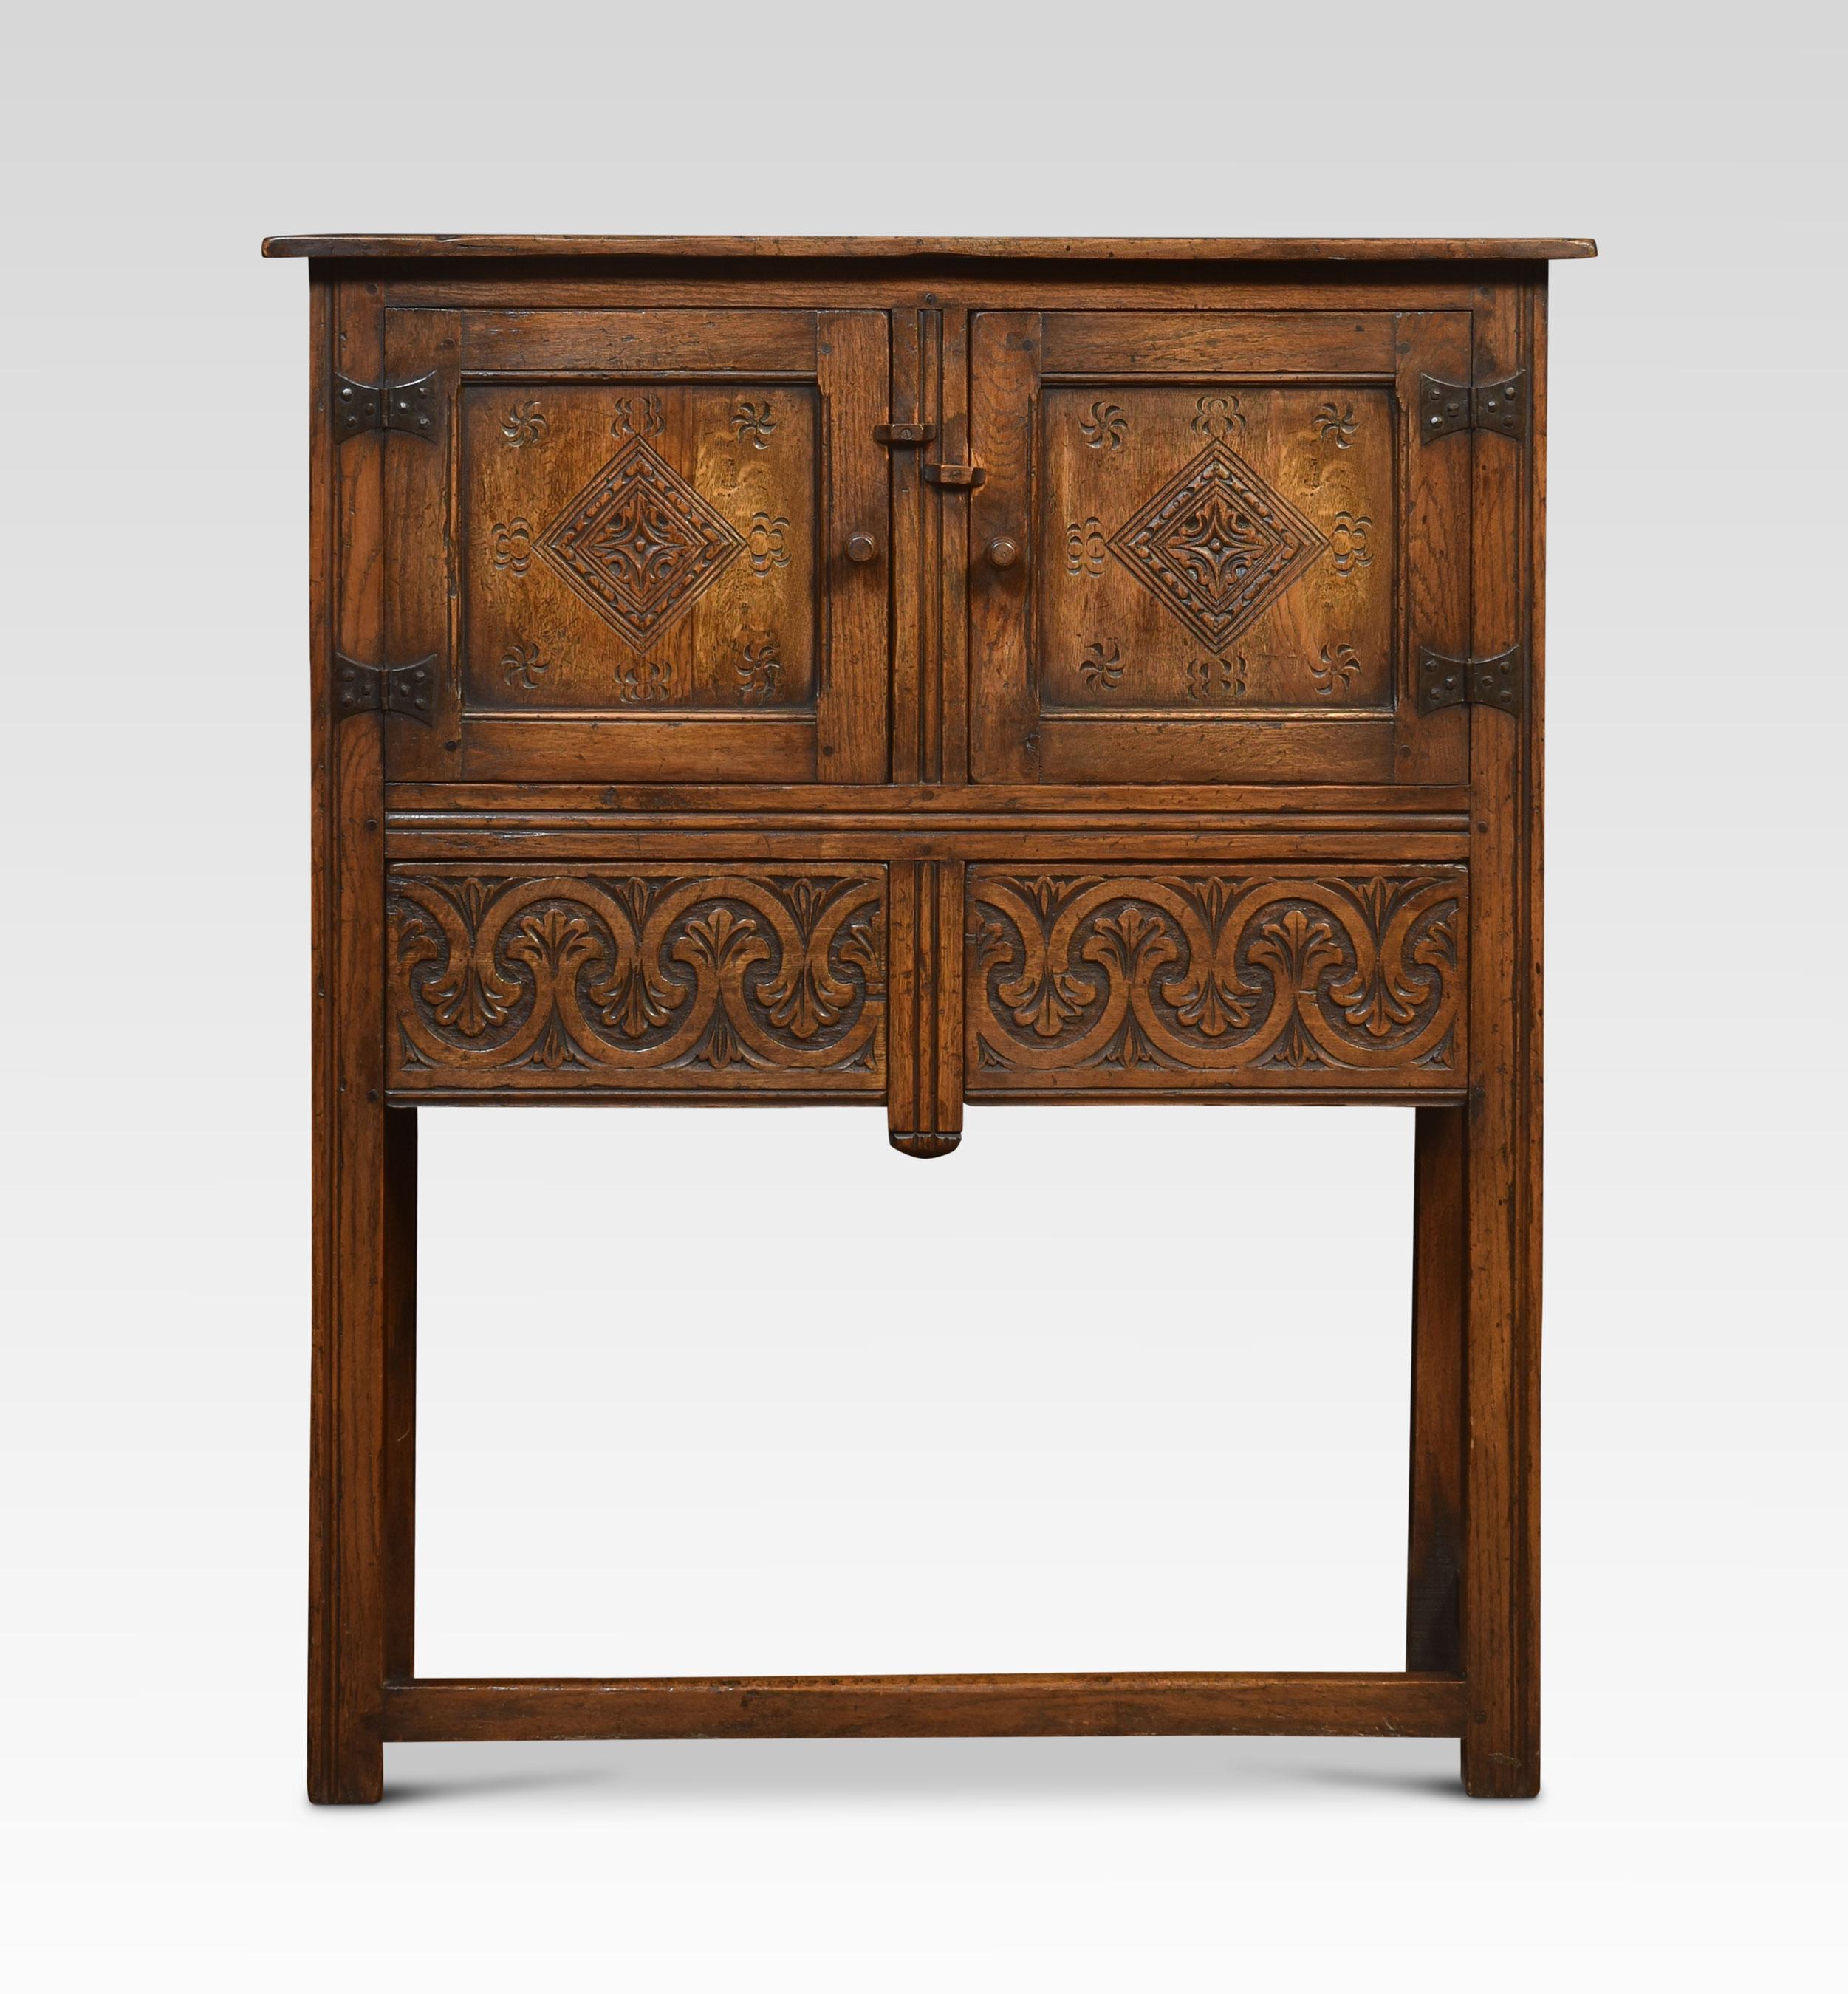 Oak cabinet the molded top above a pair of carved paneled doors with iron hinges, opening to reveal a large cupboard. The frieze is fitted with two drawers, all raised up on square supports united by stretchers.
Dimensions
Height 46.5